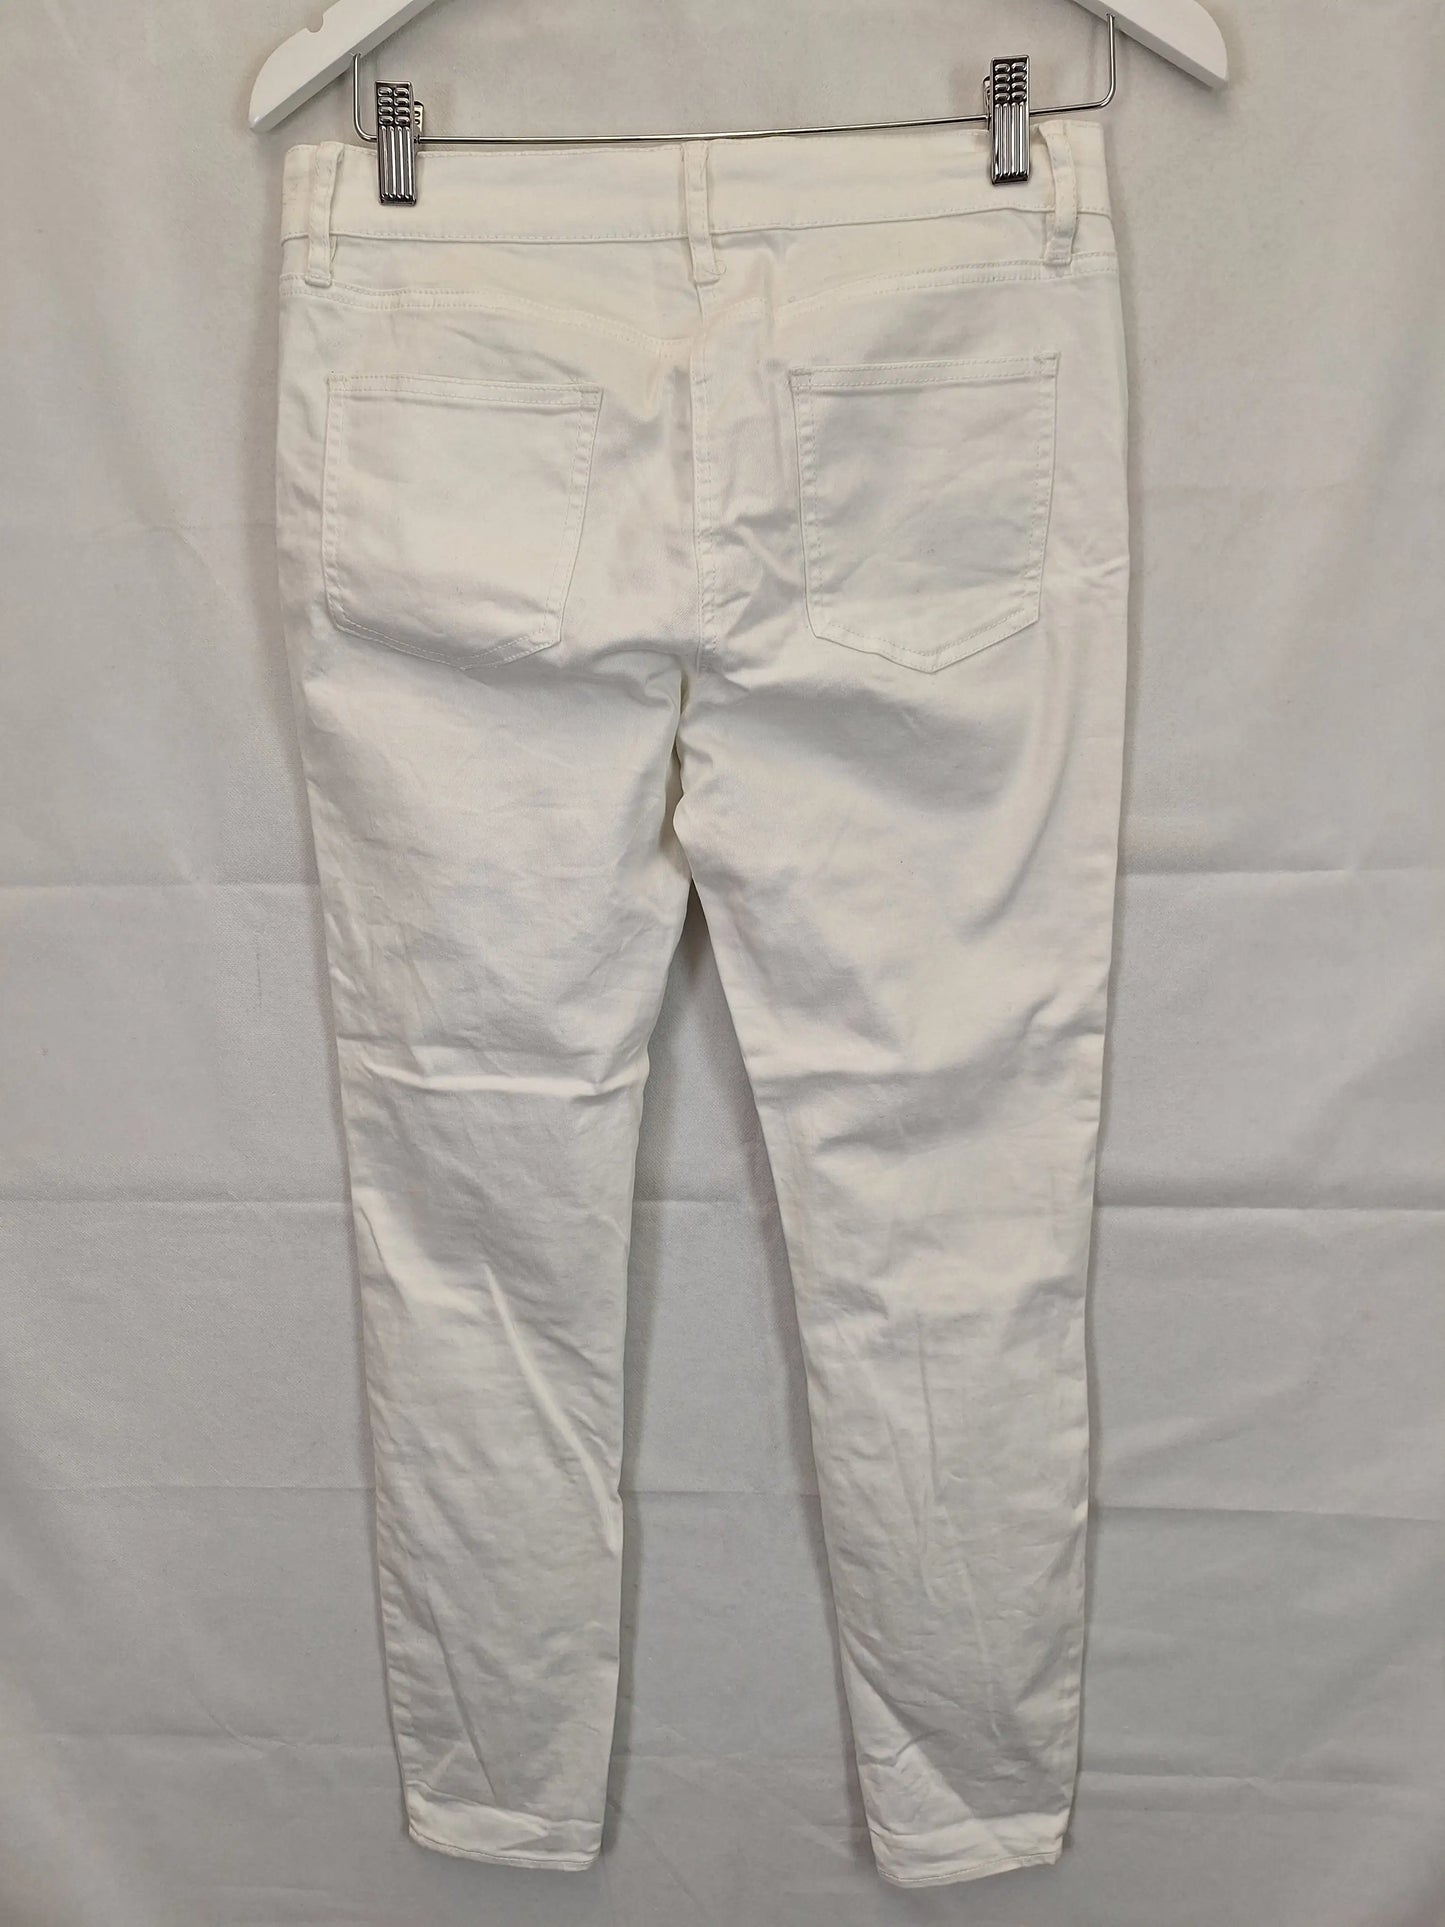 Seed Skinny White Distressed Denim Jeans Size 10 by SwapUp-Online Second Hand Store-Online Thrift Store